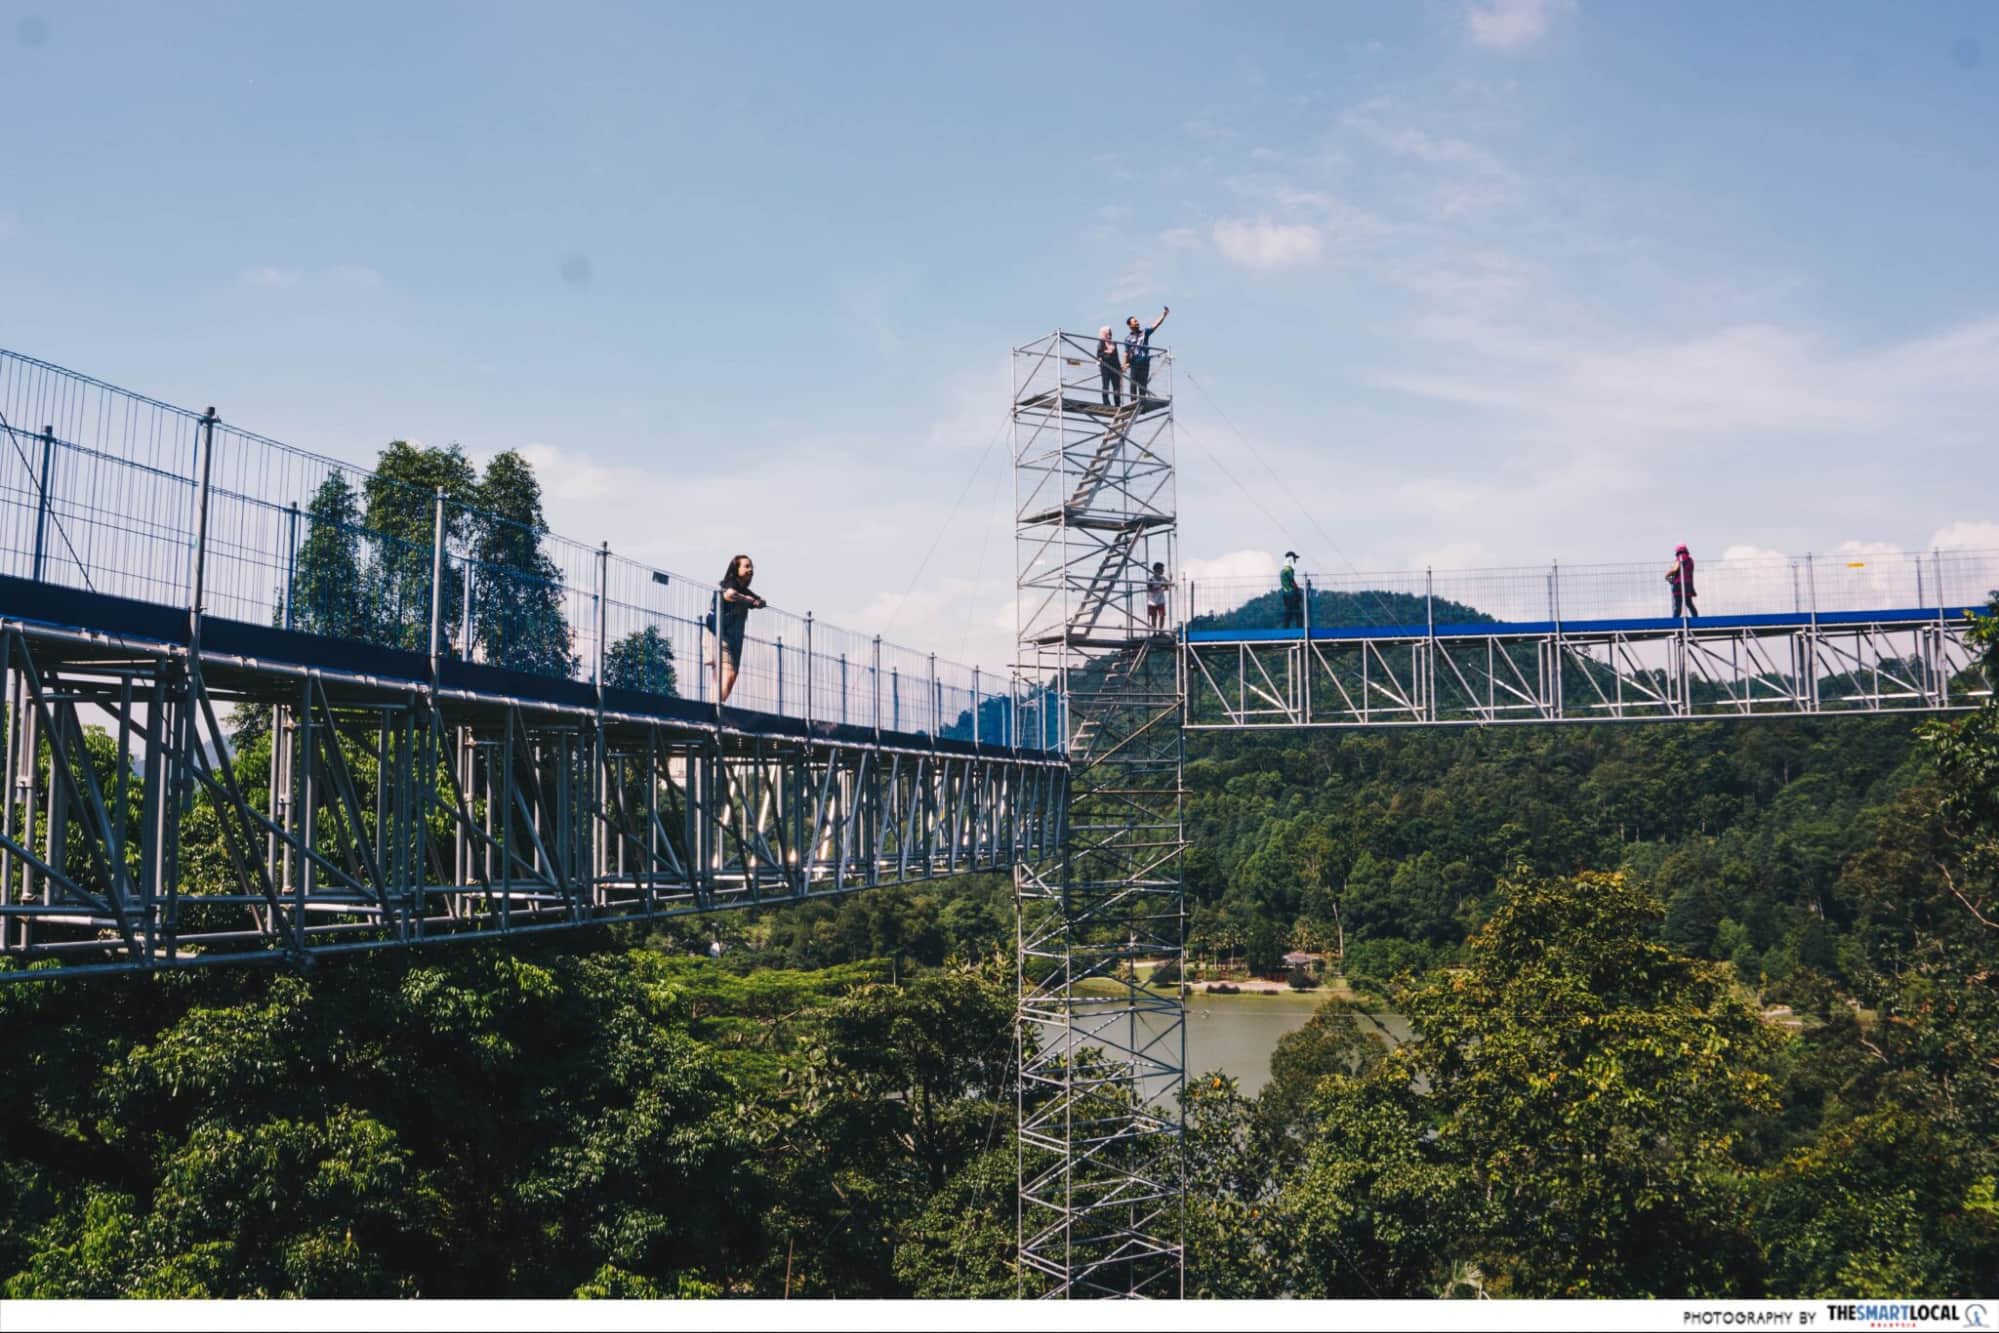 Things to do in KL - Forest Skywalk